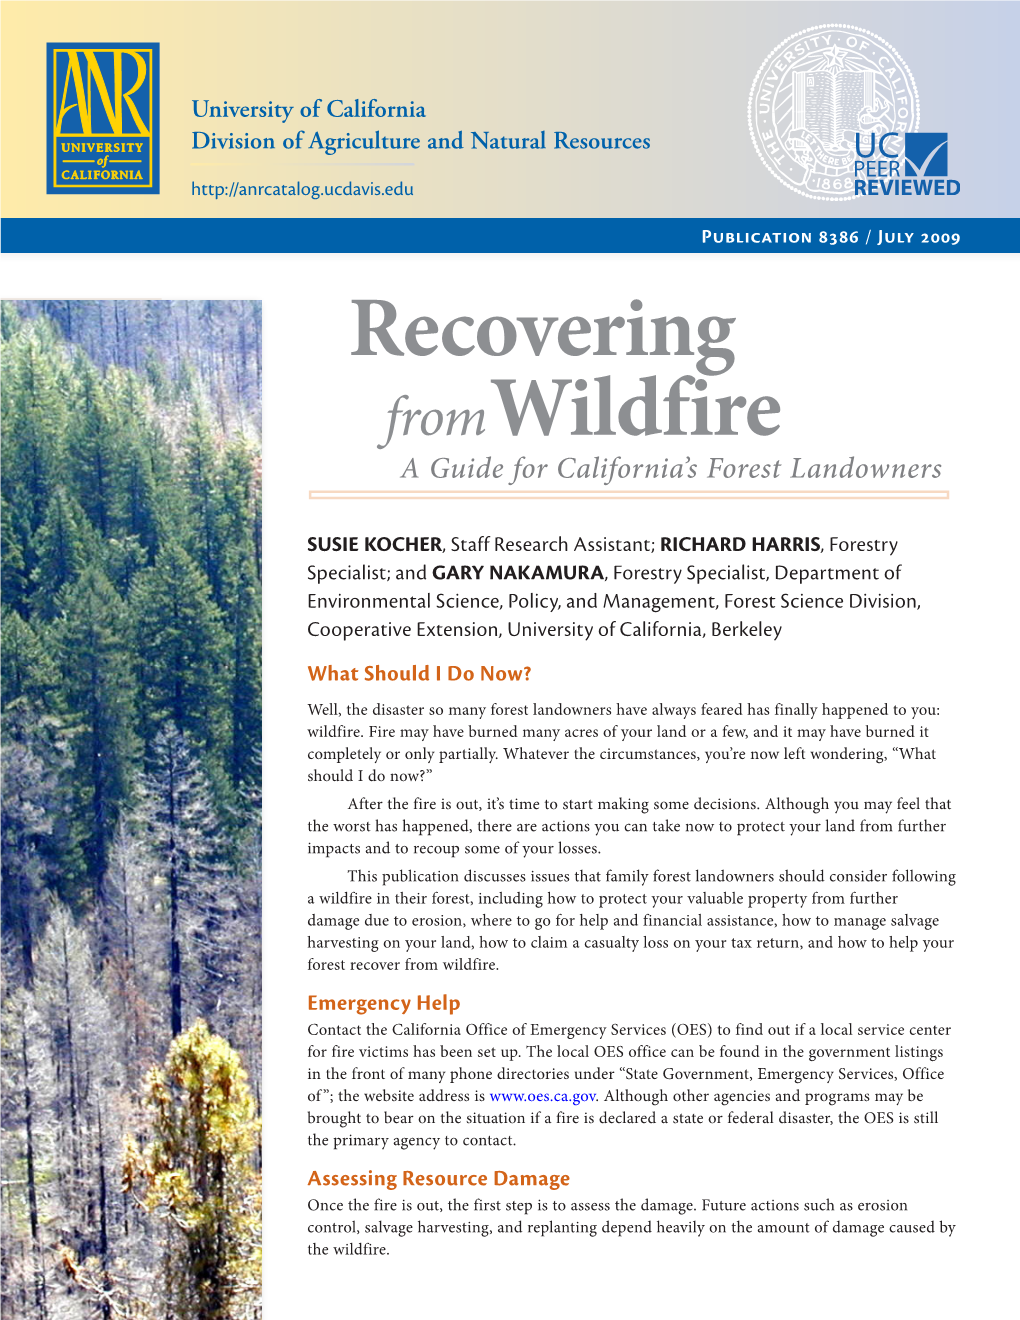 Recovering from Wildfire: a Guide for California's Forest Landowners